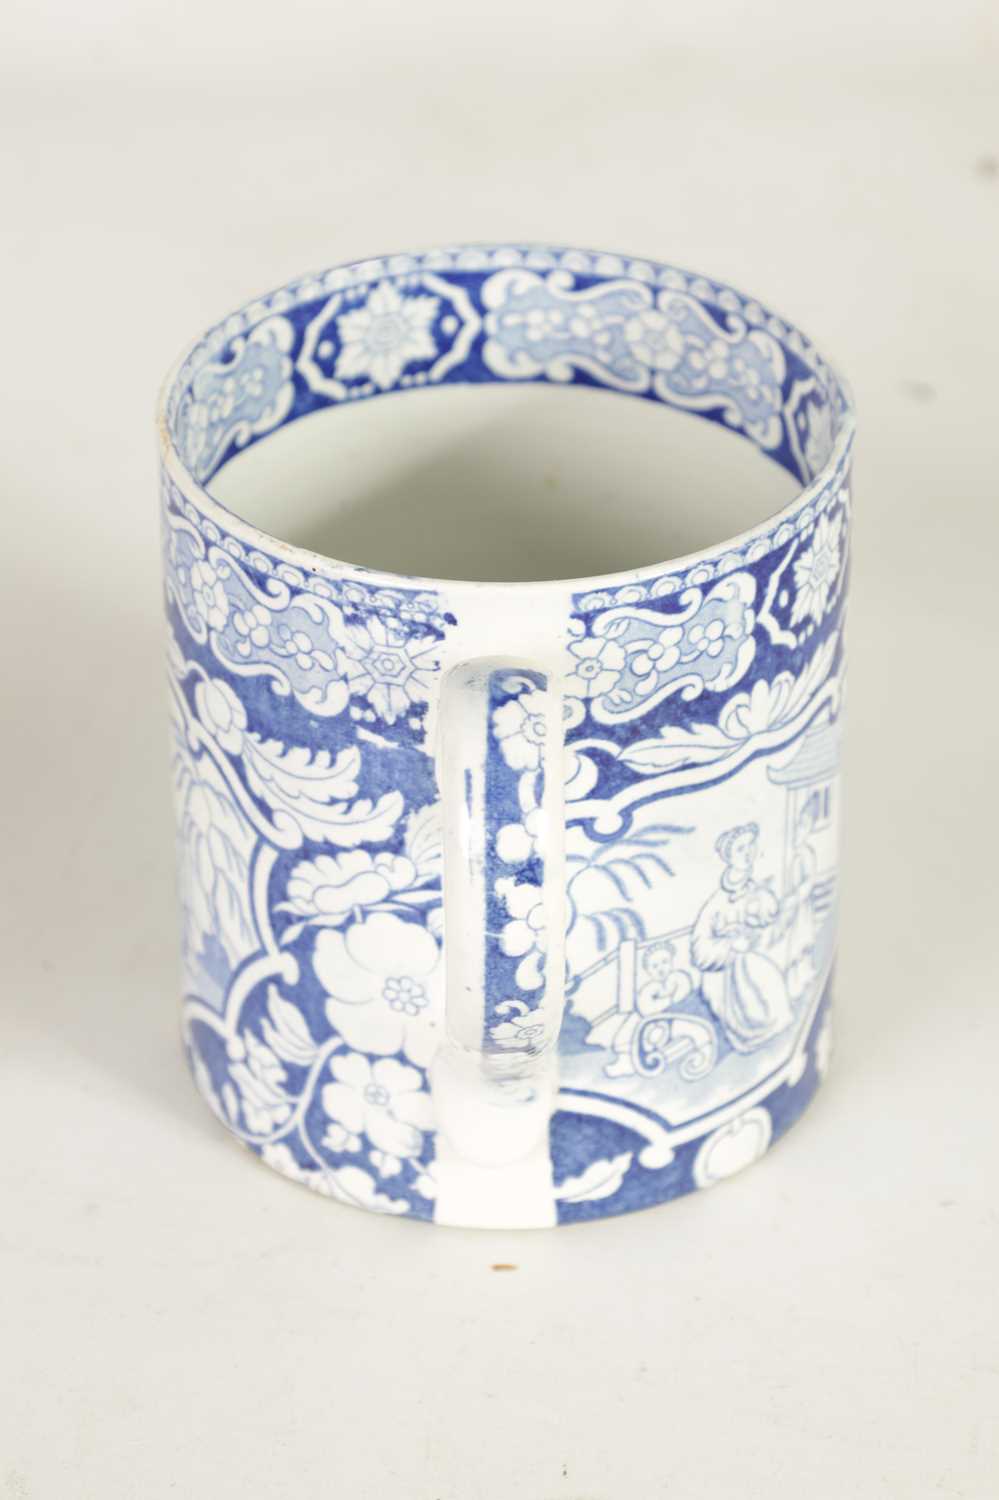 A EARLY 19TH CENTURY ORIENTAL STYLE PEARL WEAR MUG - POSSIBLY SPODE - Image 6 of 8